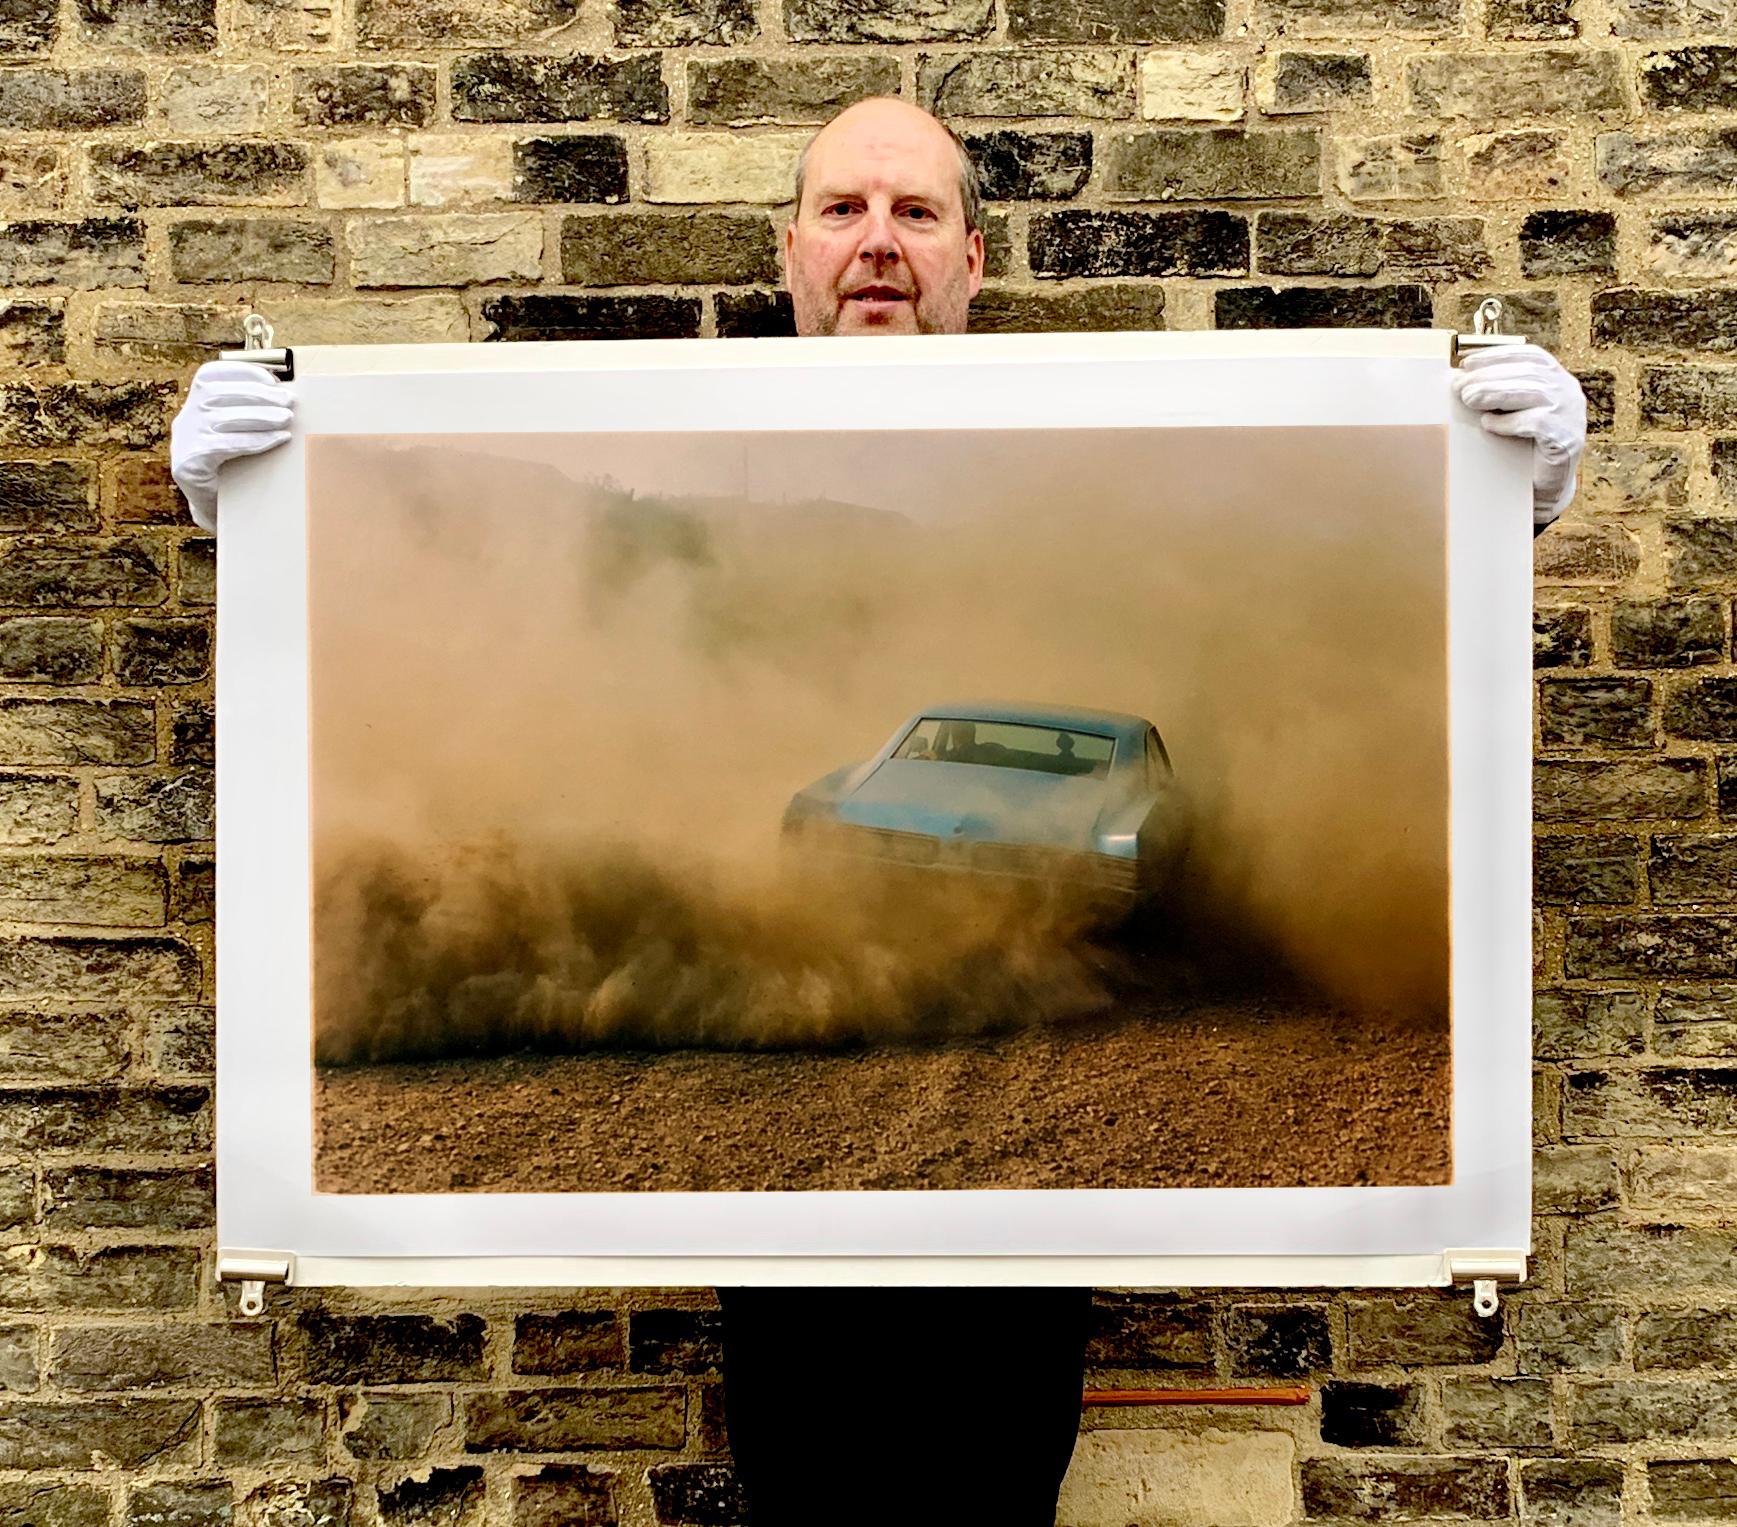 Buick in the Dust III, Hemsby, Norfolk - Car, color photography - Contemporary Photograph by Richard Heeps